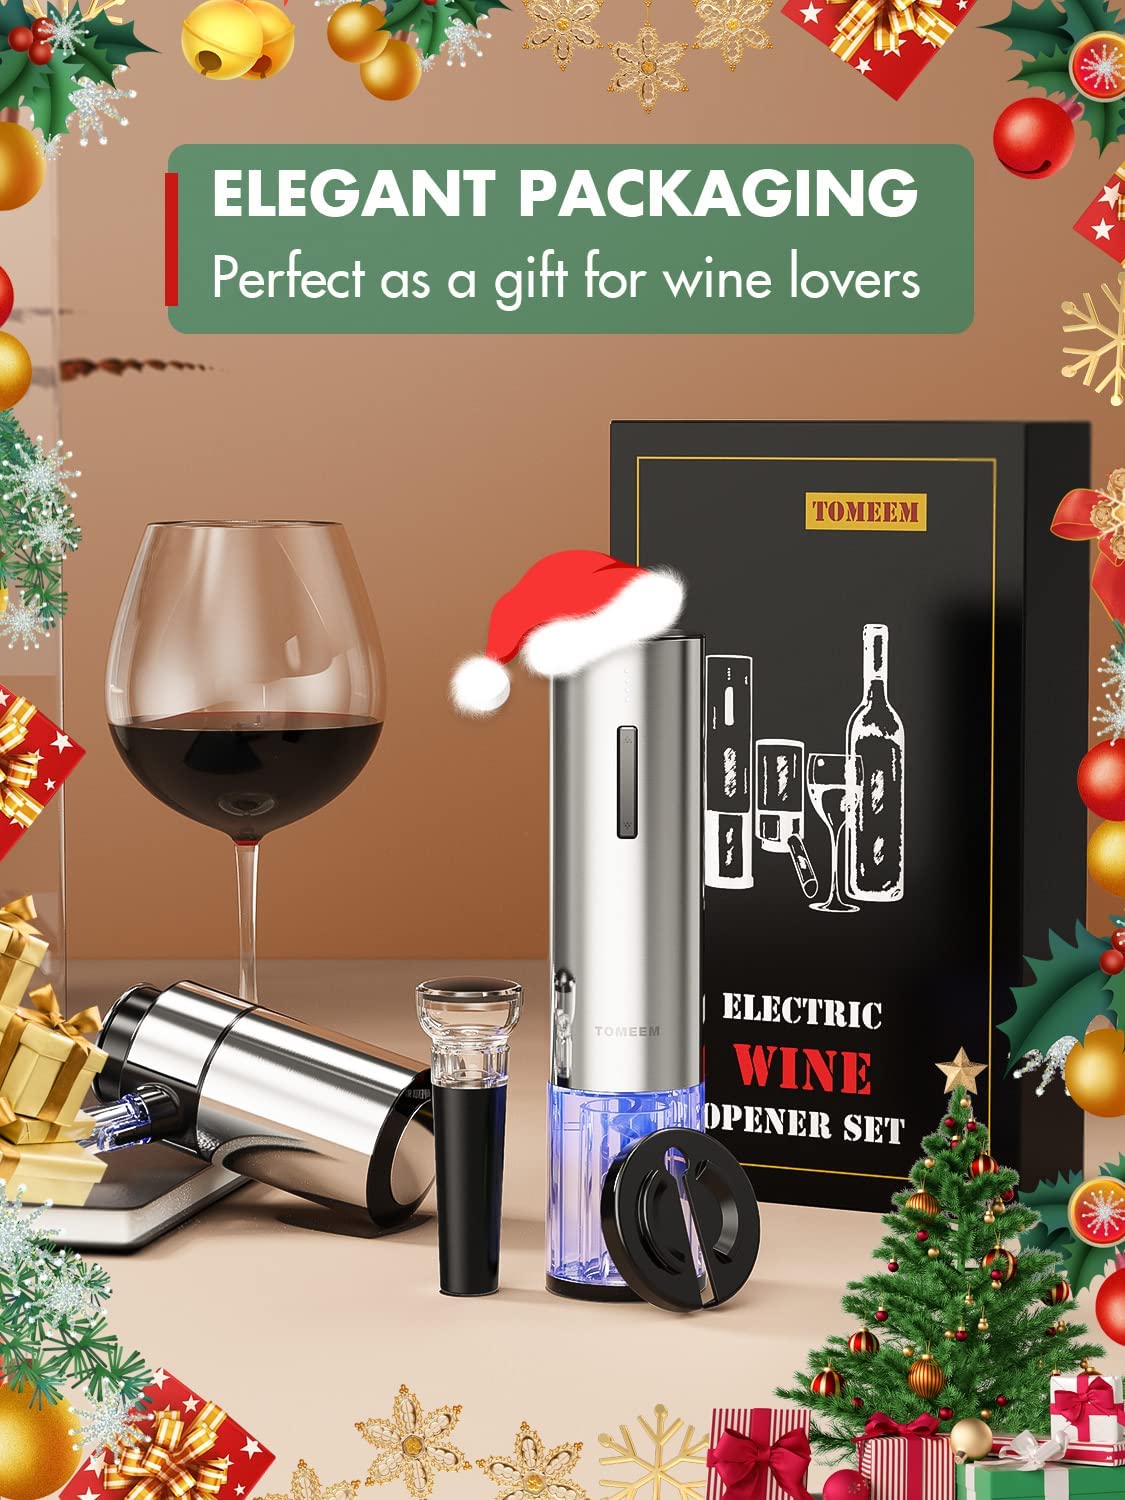 Electric Wine Opener Set, Tomeem Wine Gift Set with Rechargeable Wine Opener, Electric Wine Aerator, Vacuum Stoppers and Foil Cutter, 4-in-1 Electric Wine Bottle Opener for Home Party Bar Outdoor